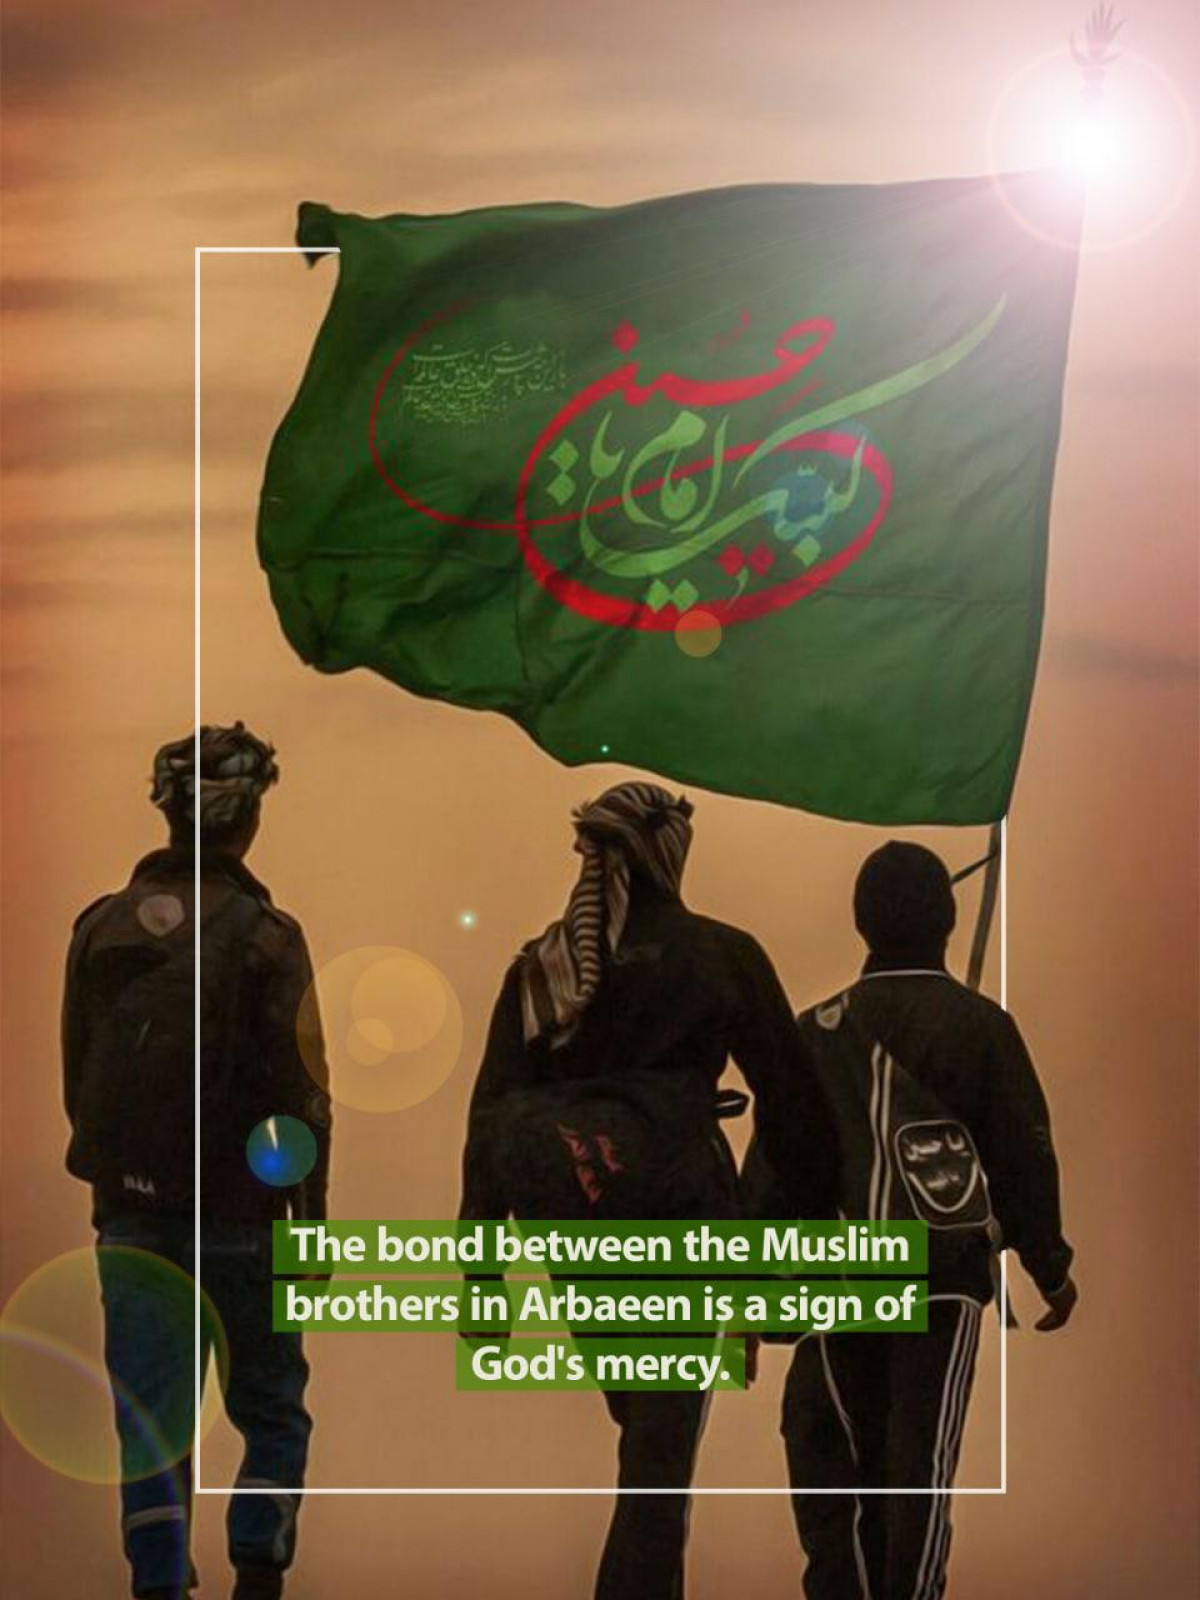 The bond between the Muslim brothers in Arbaeen is a sign of God's mercy.